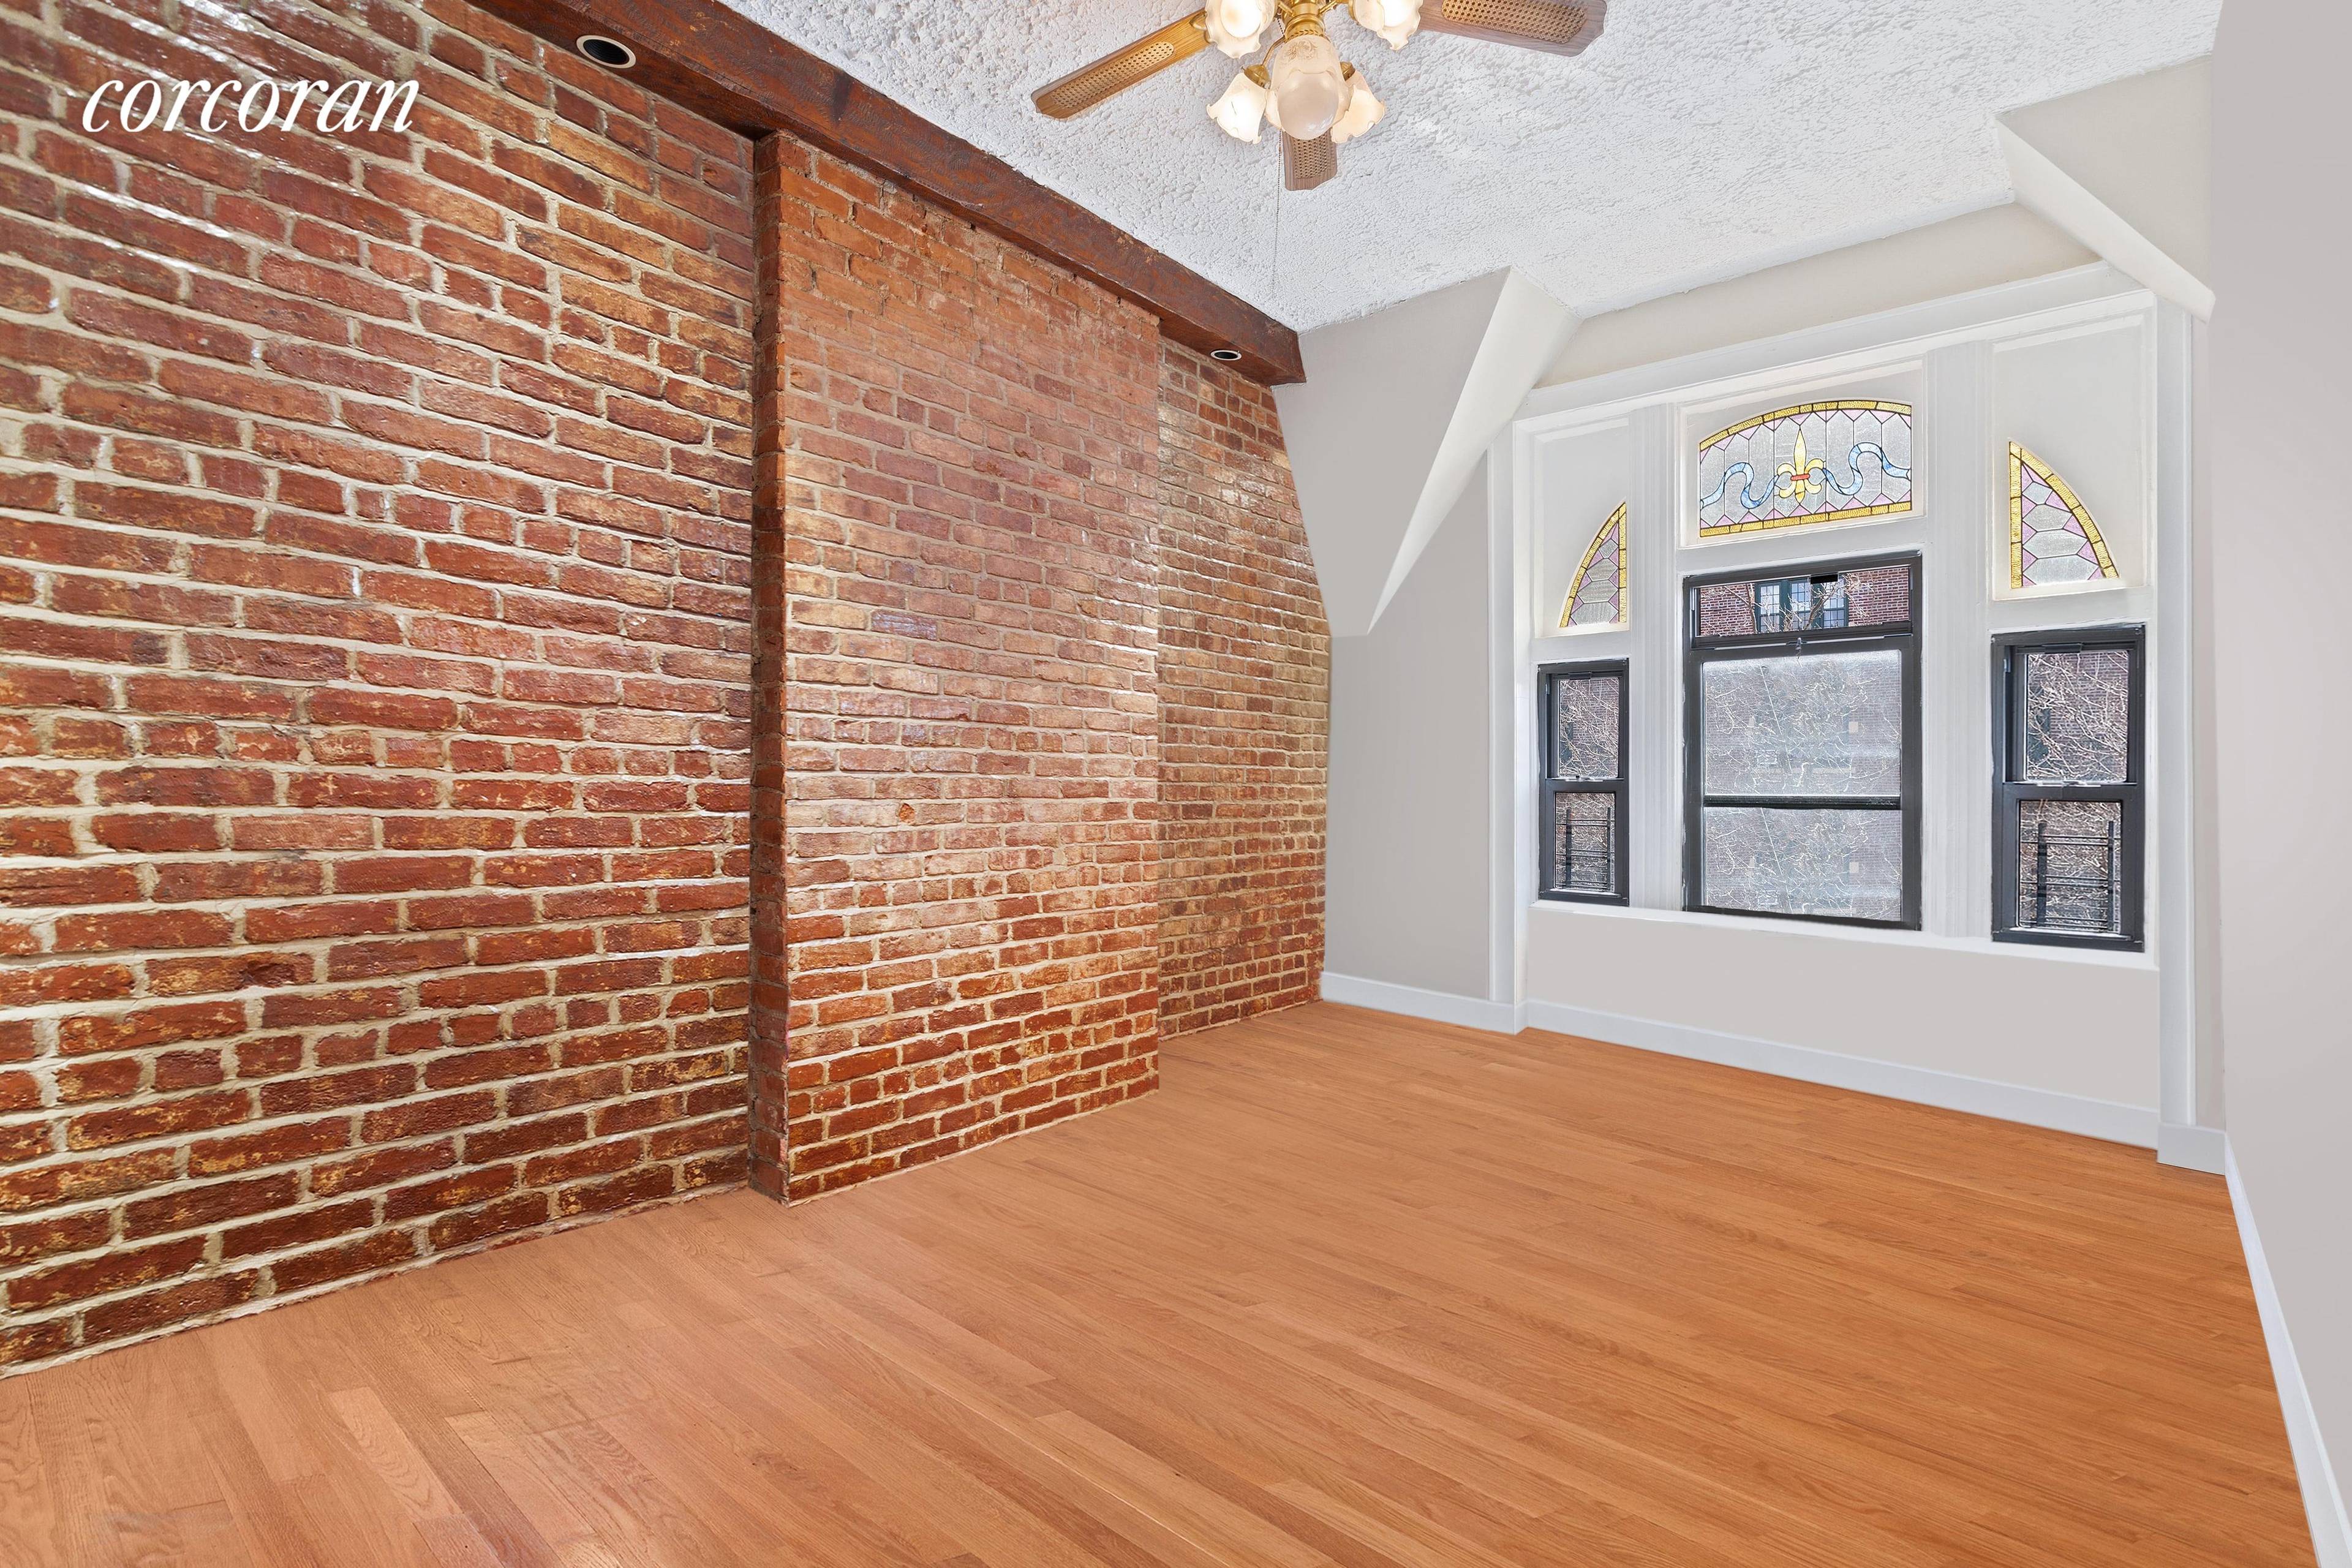 Union Street Beauty. This fantastic apartment can be all yours May 1st.